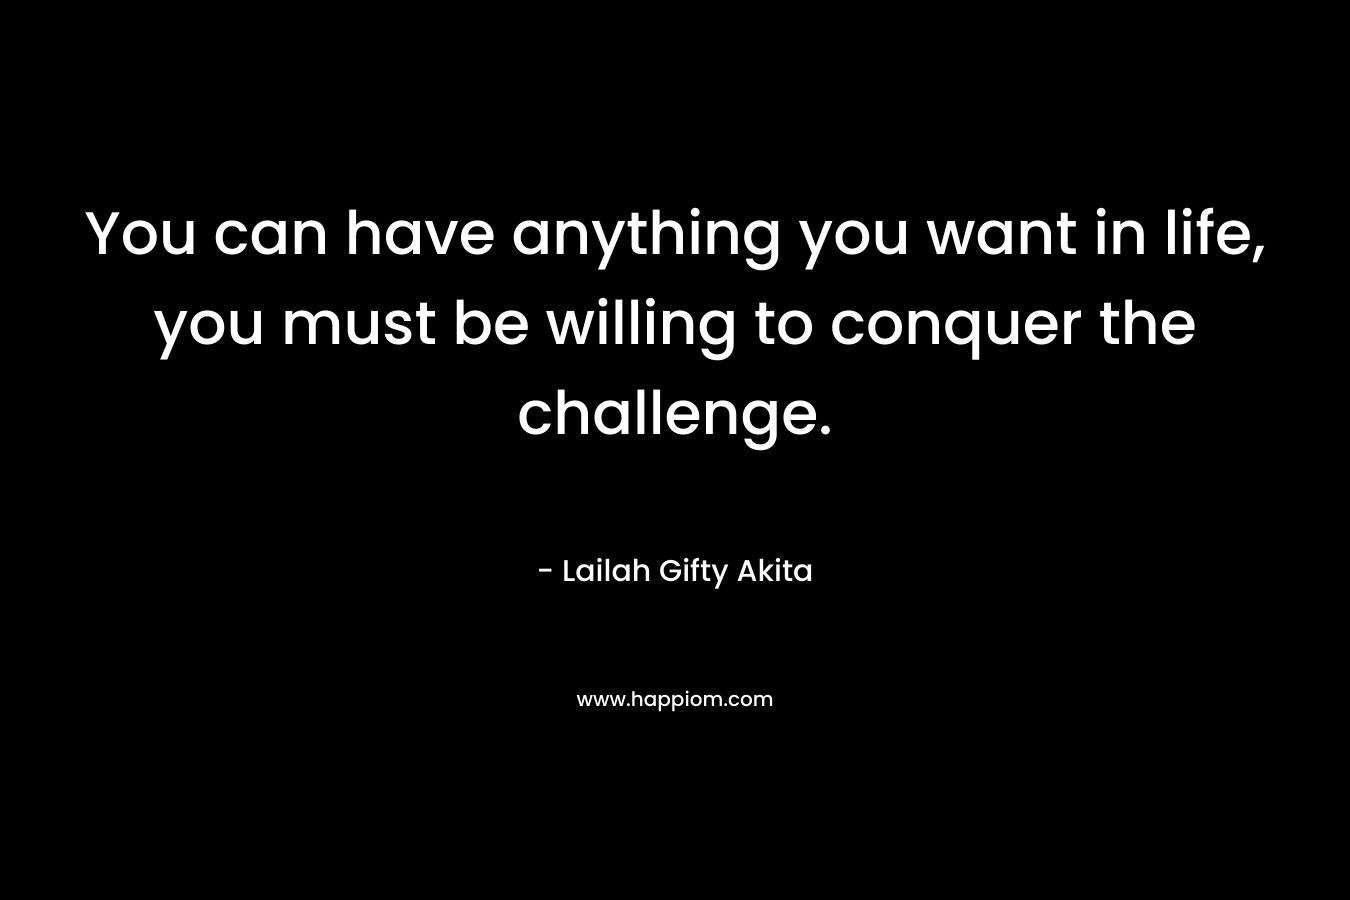 You can have anything you want in life, you must be willing to conquer the challenge. – Lailah Gifty Akita